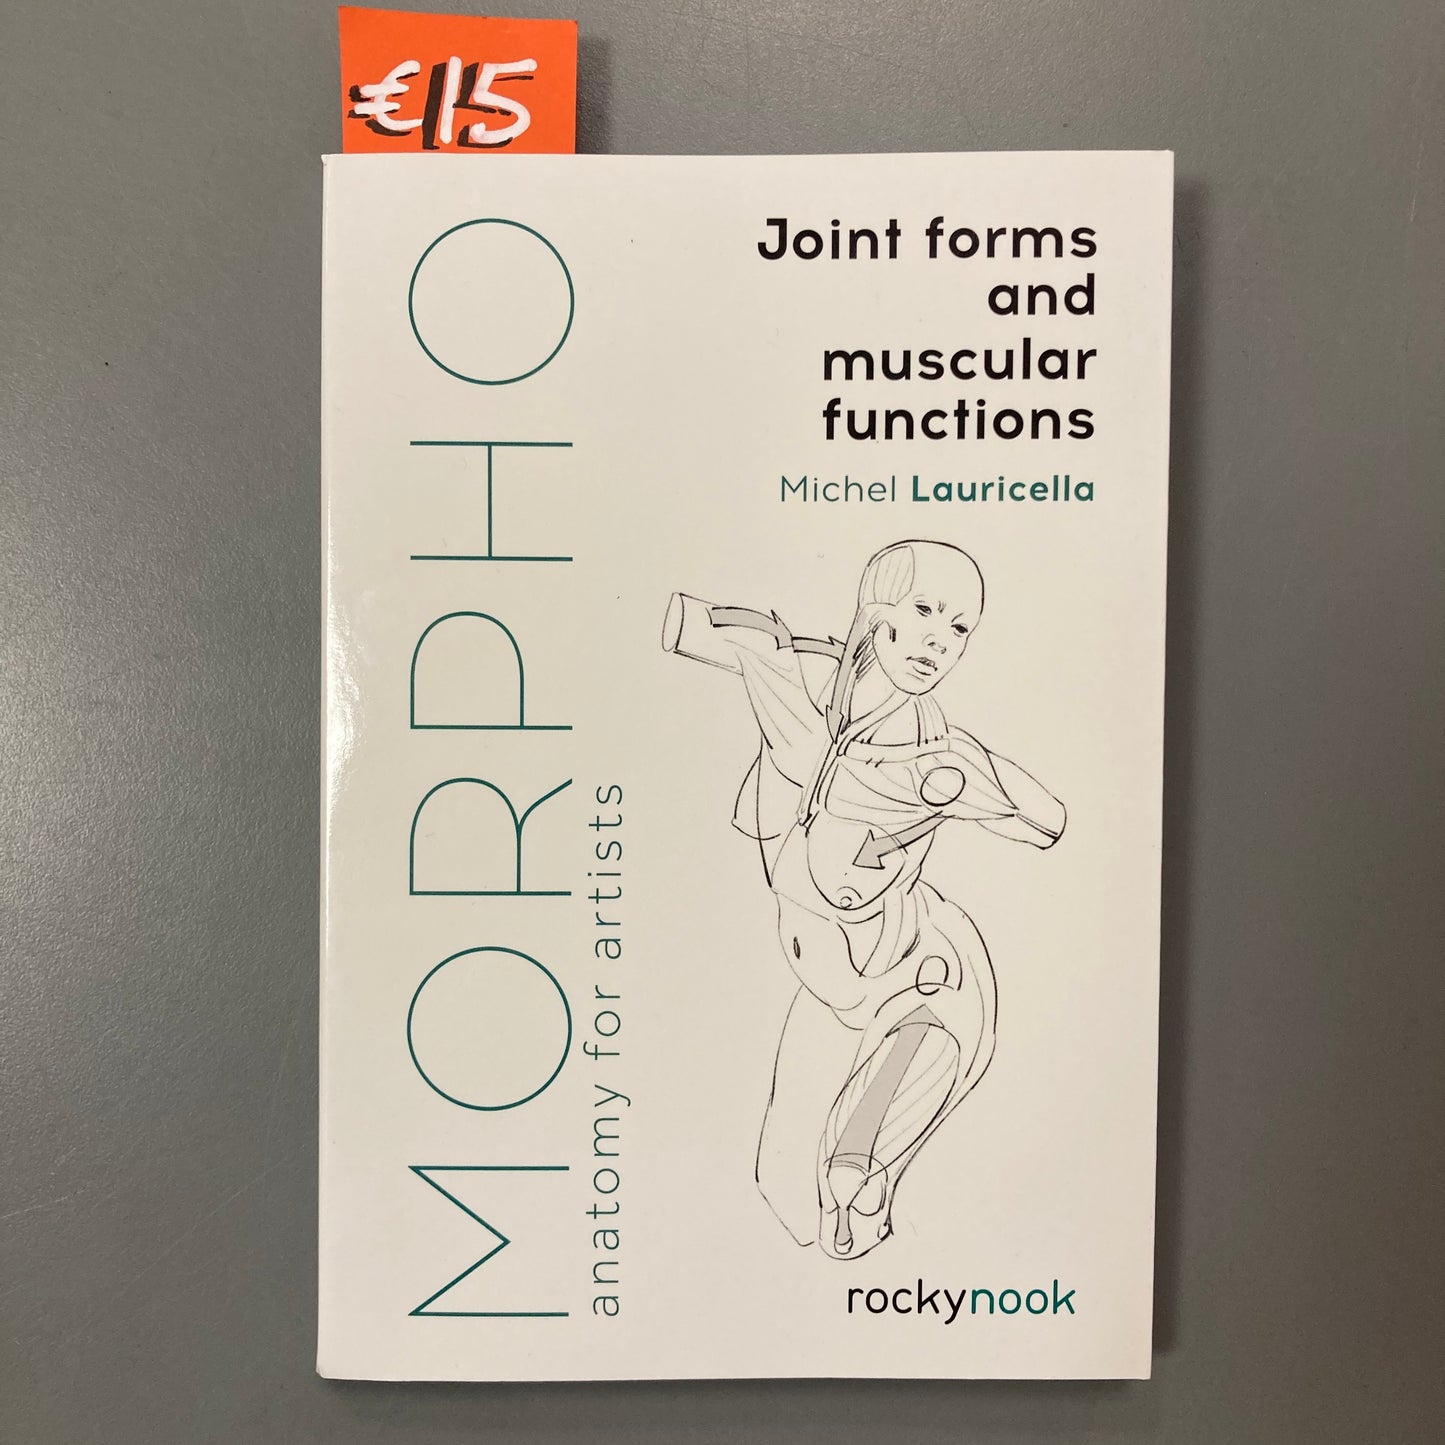 MORPHO: Joint forms and muscular functions